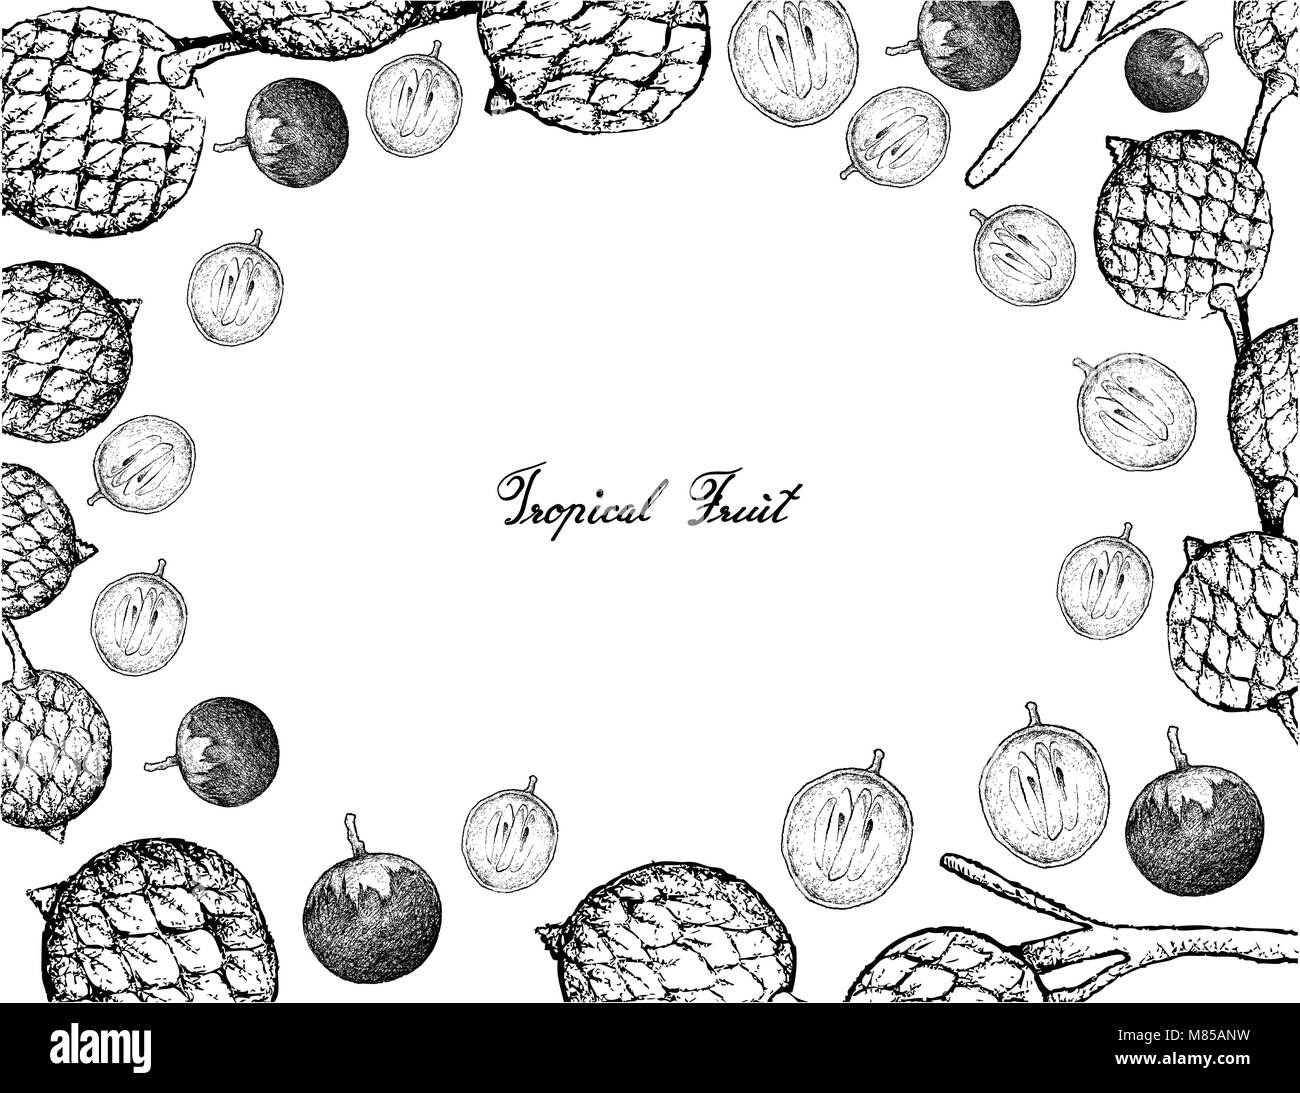 Tropical Fruits, Illustration Frame of Hand Drawn Bunch of Sketch Star Apple or Chrysophyllum Cainito and Rattan Fruits Isolated on A White Background Stock Vector